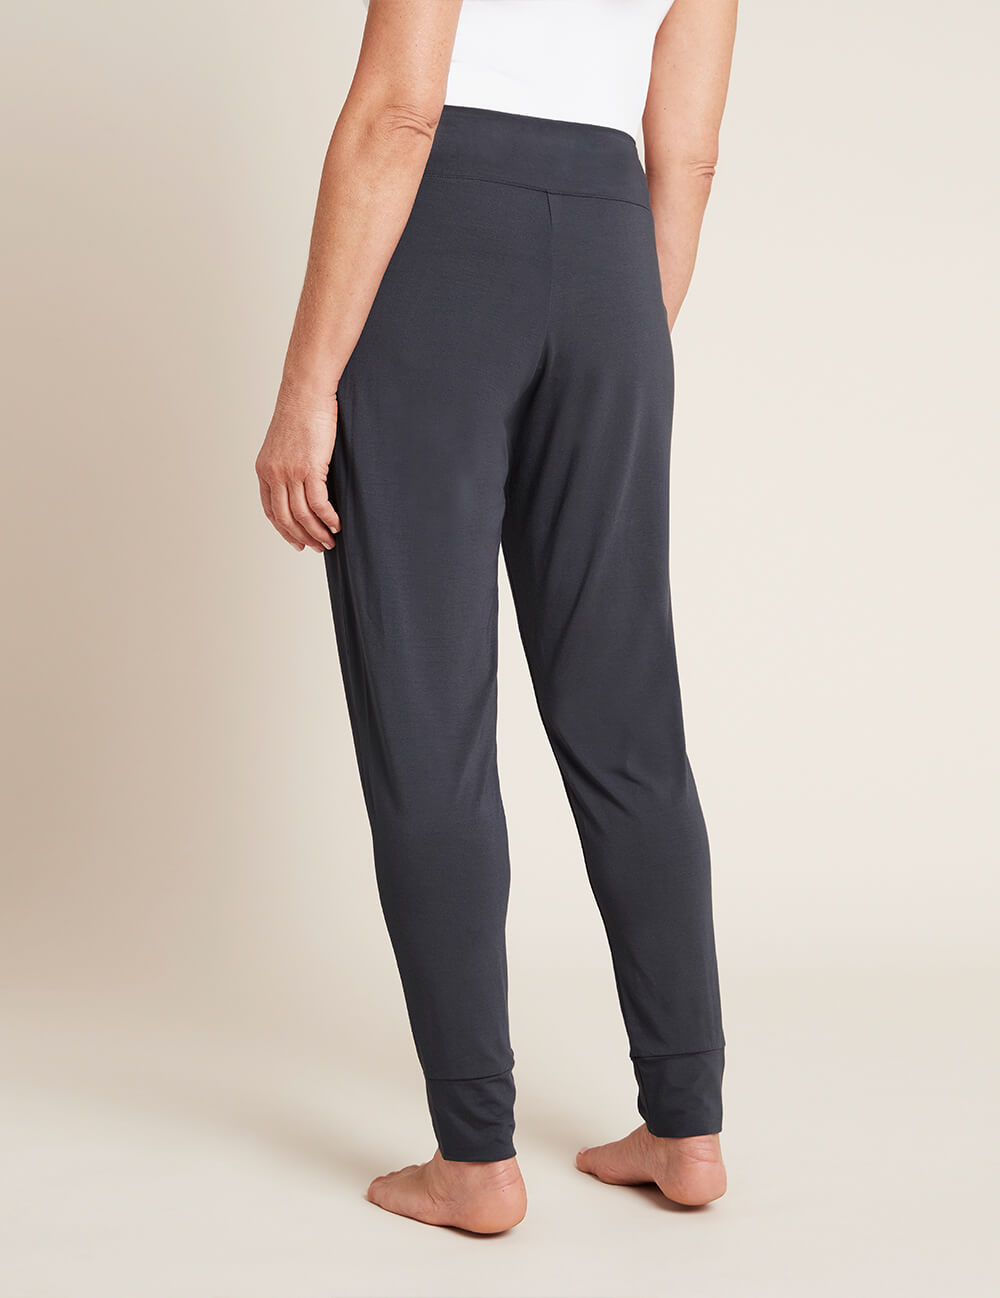 Downtime Lounge Pant | Boody Eco Wear US | Tapered Sleep Pants Women